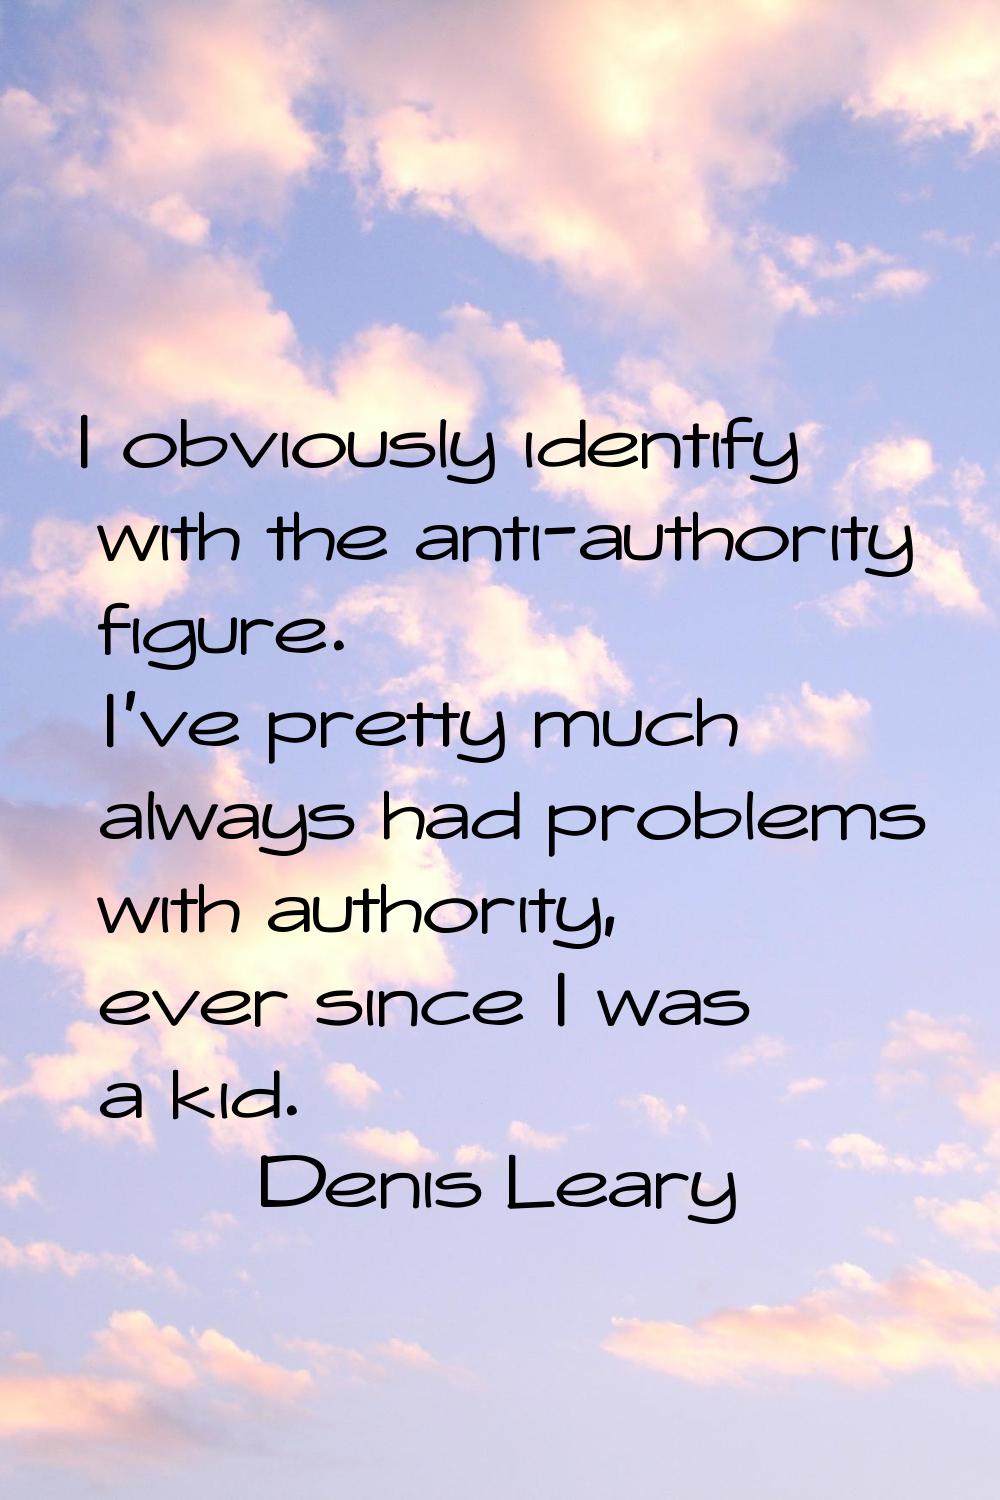 I obviously identify with the anti-authority figure. I've pretty much always had problems with auth